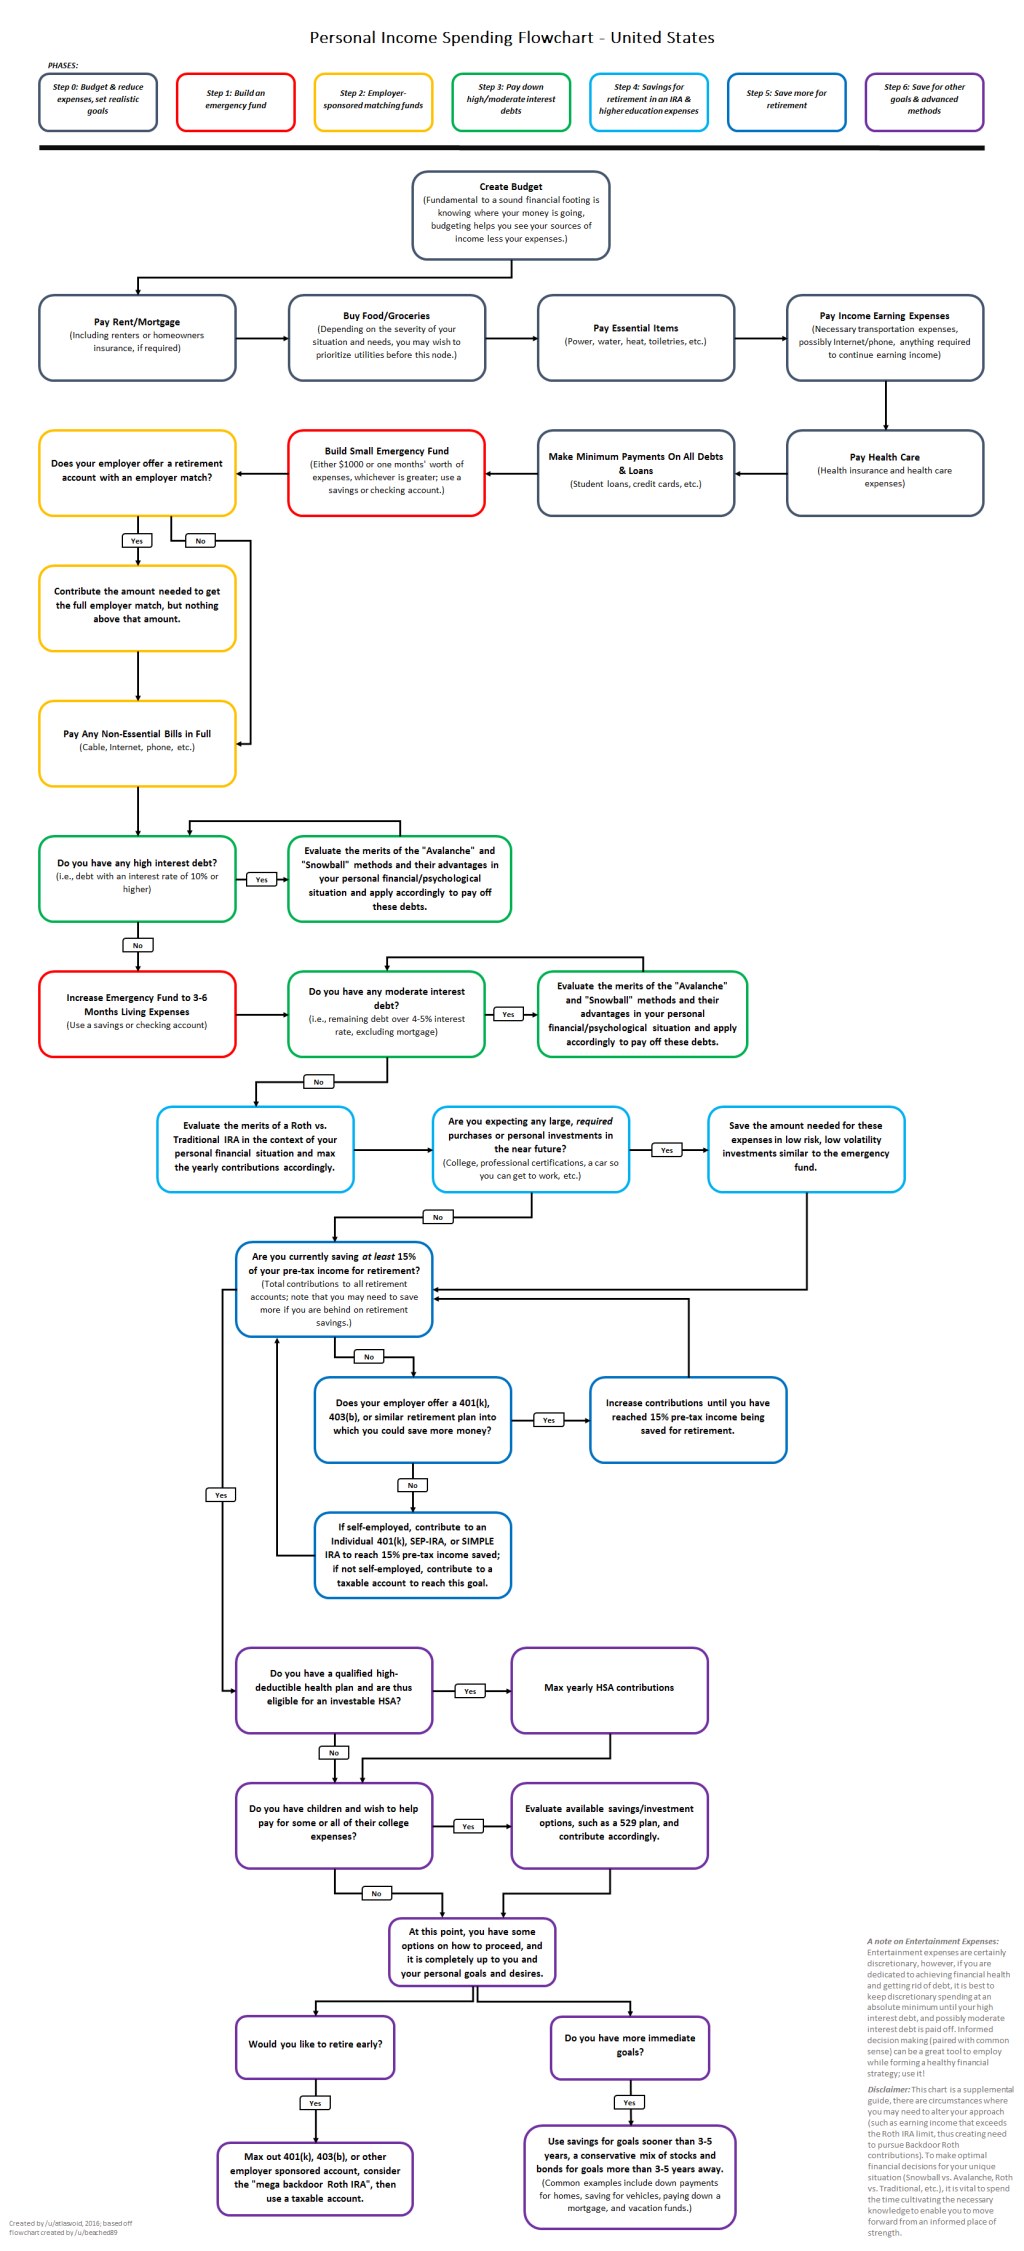 personal finance reddit wiki - How to prioritize spending your money - a flowchart (redesigned